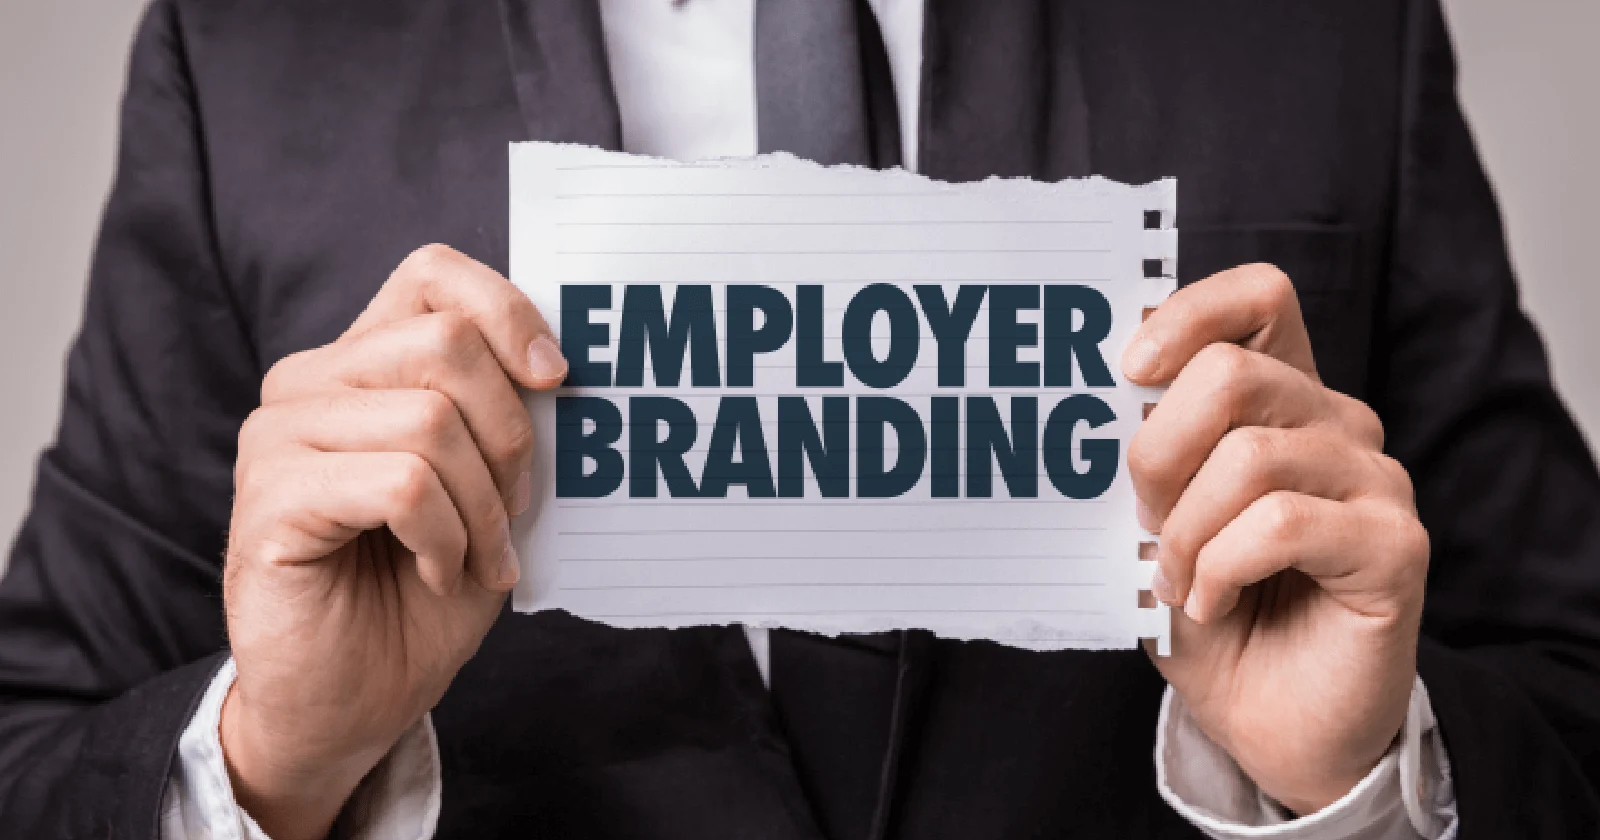 Employee Branding: Meaning, Strategies and Examples